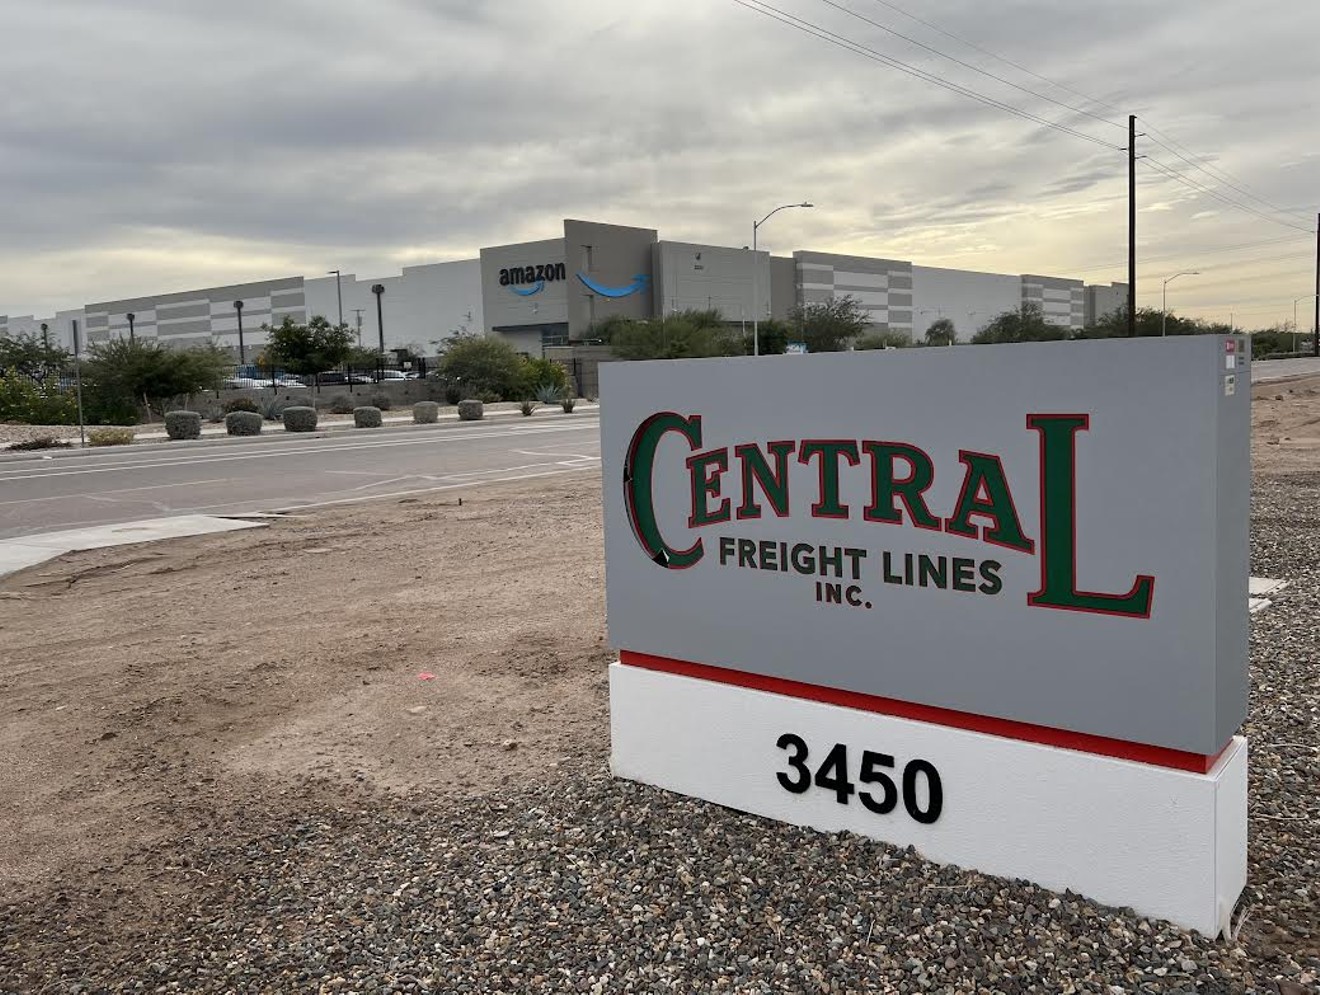 Central Freight Lines operates a stone's throw from its former customer, Amazon, in west Phoenix. Central Freight announced suddenly last week it would be closed by New Year's Eve.